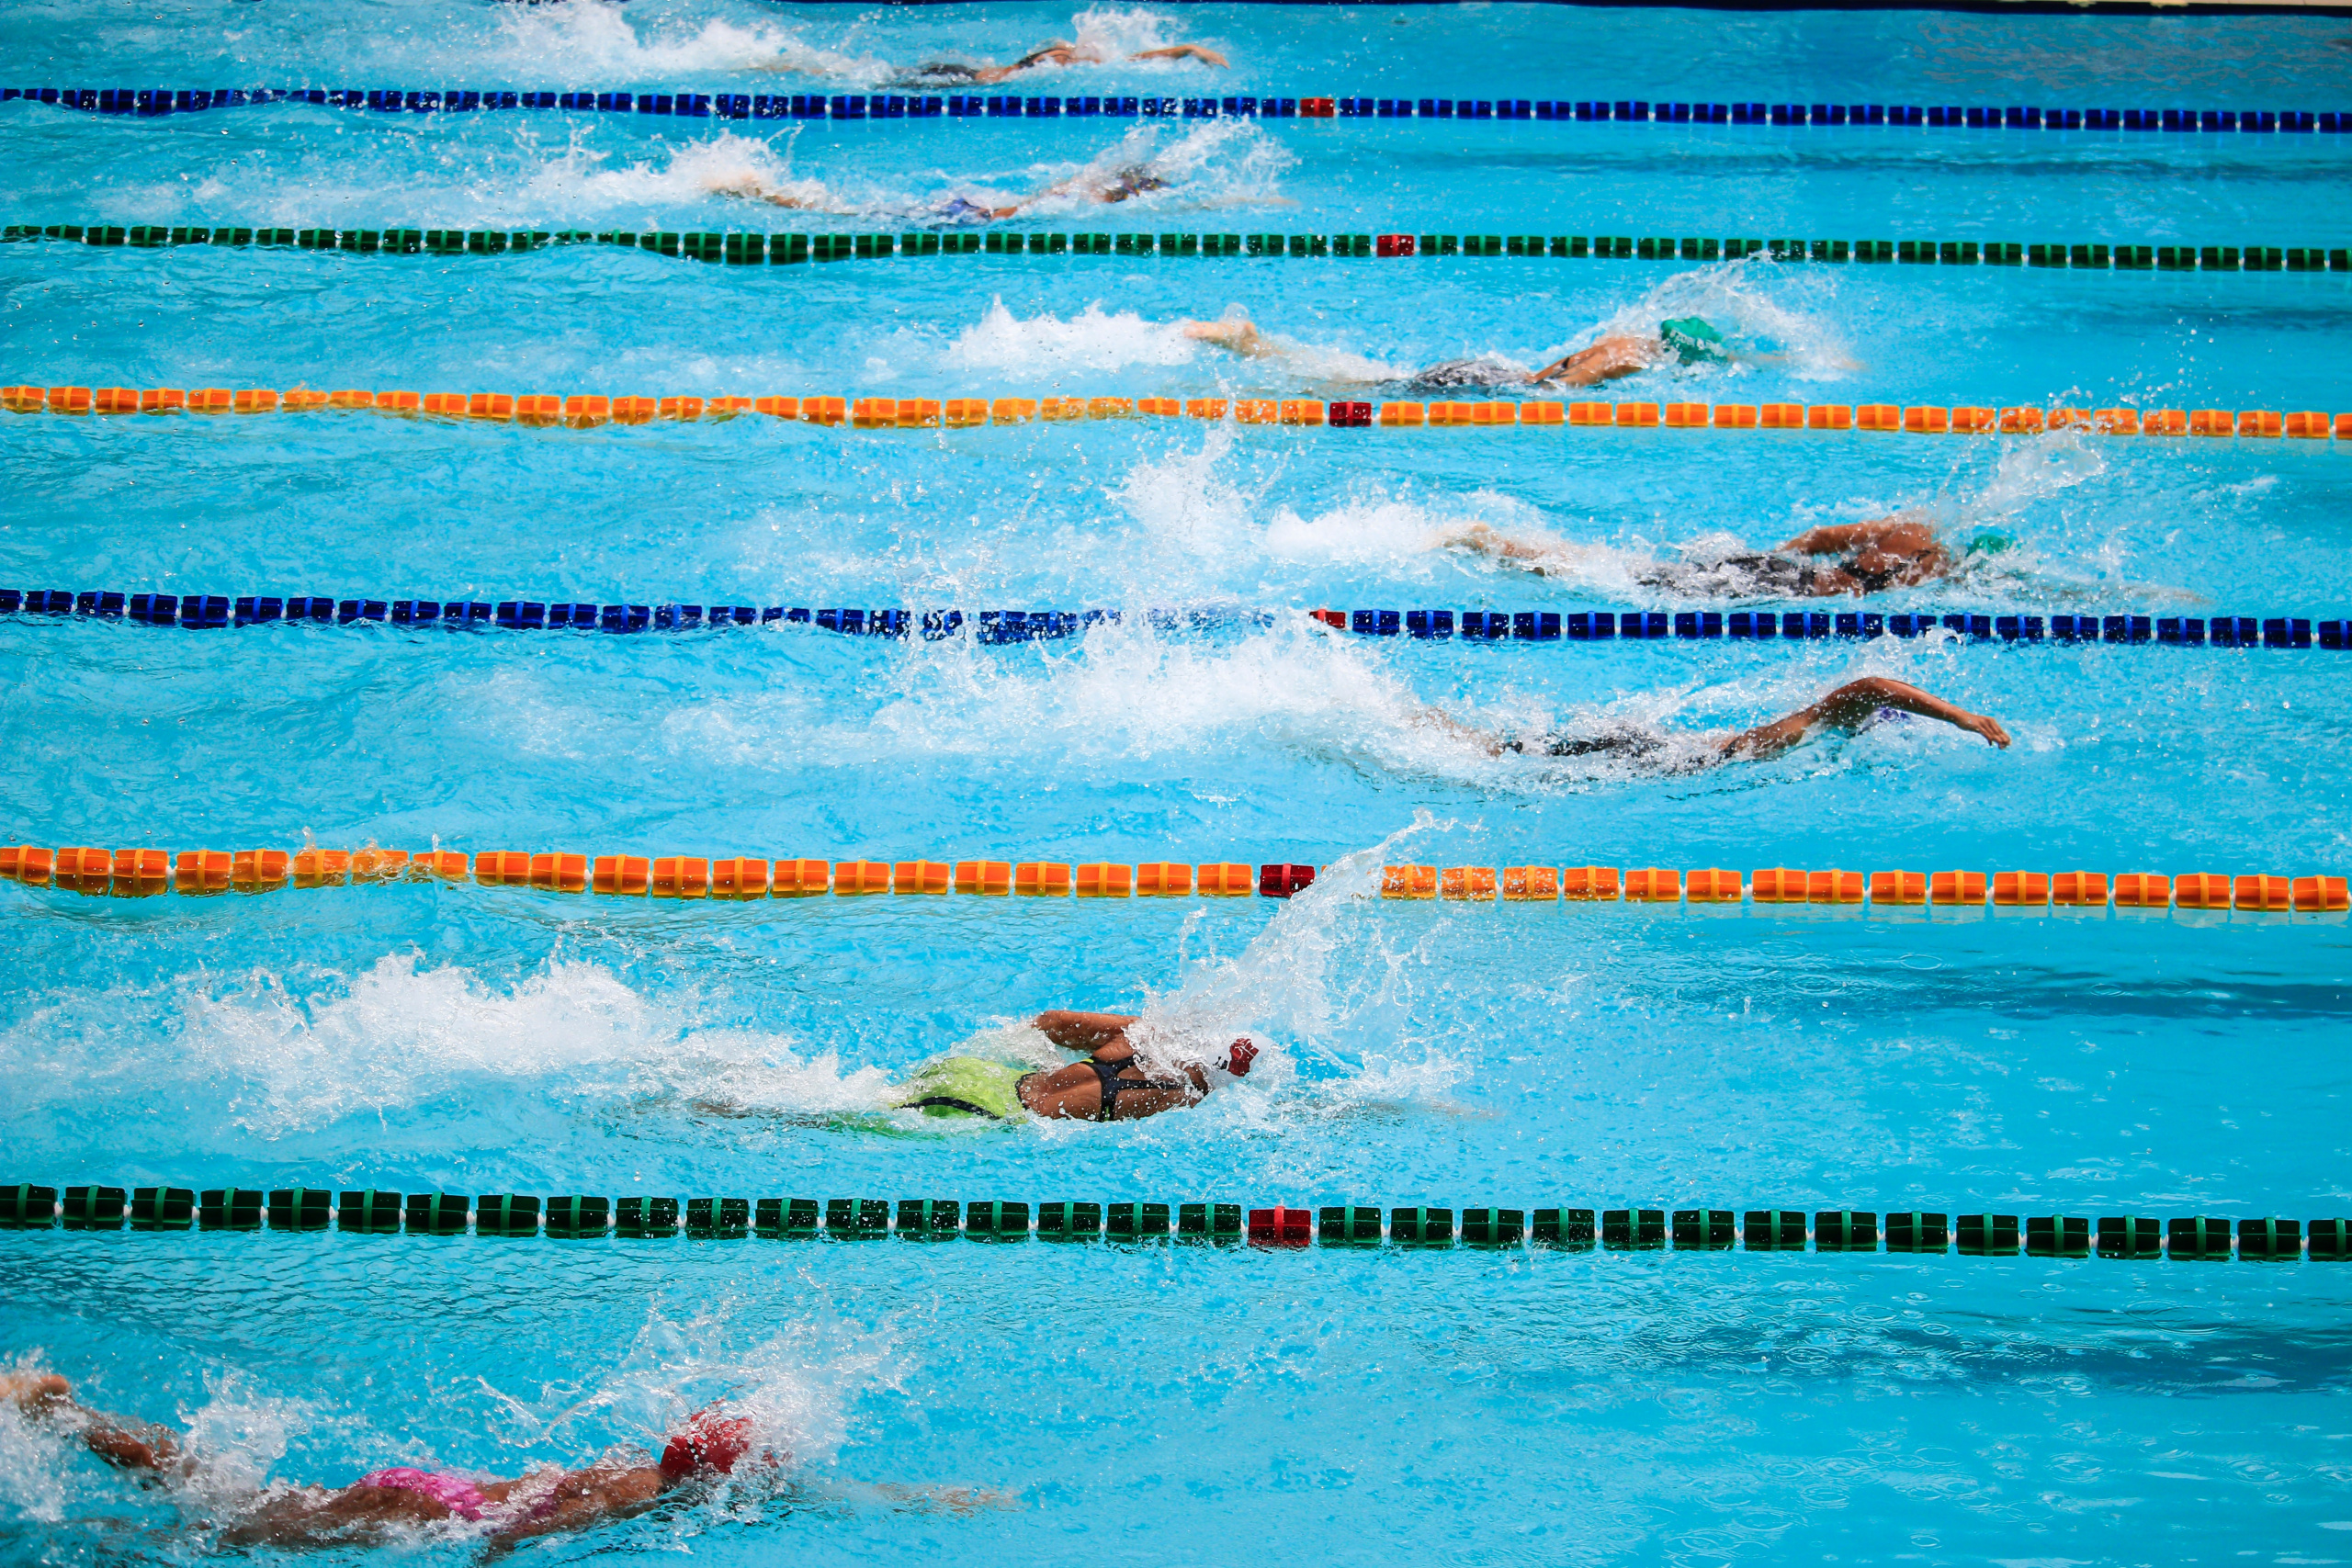 multiple swimmers racing in lanes of a swimming pool